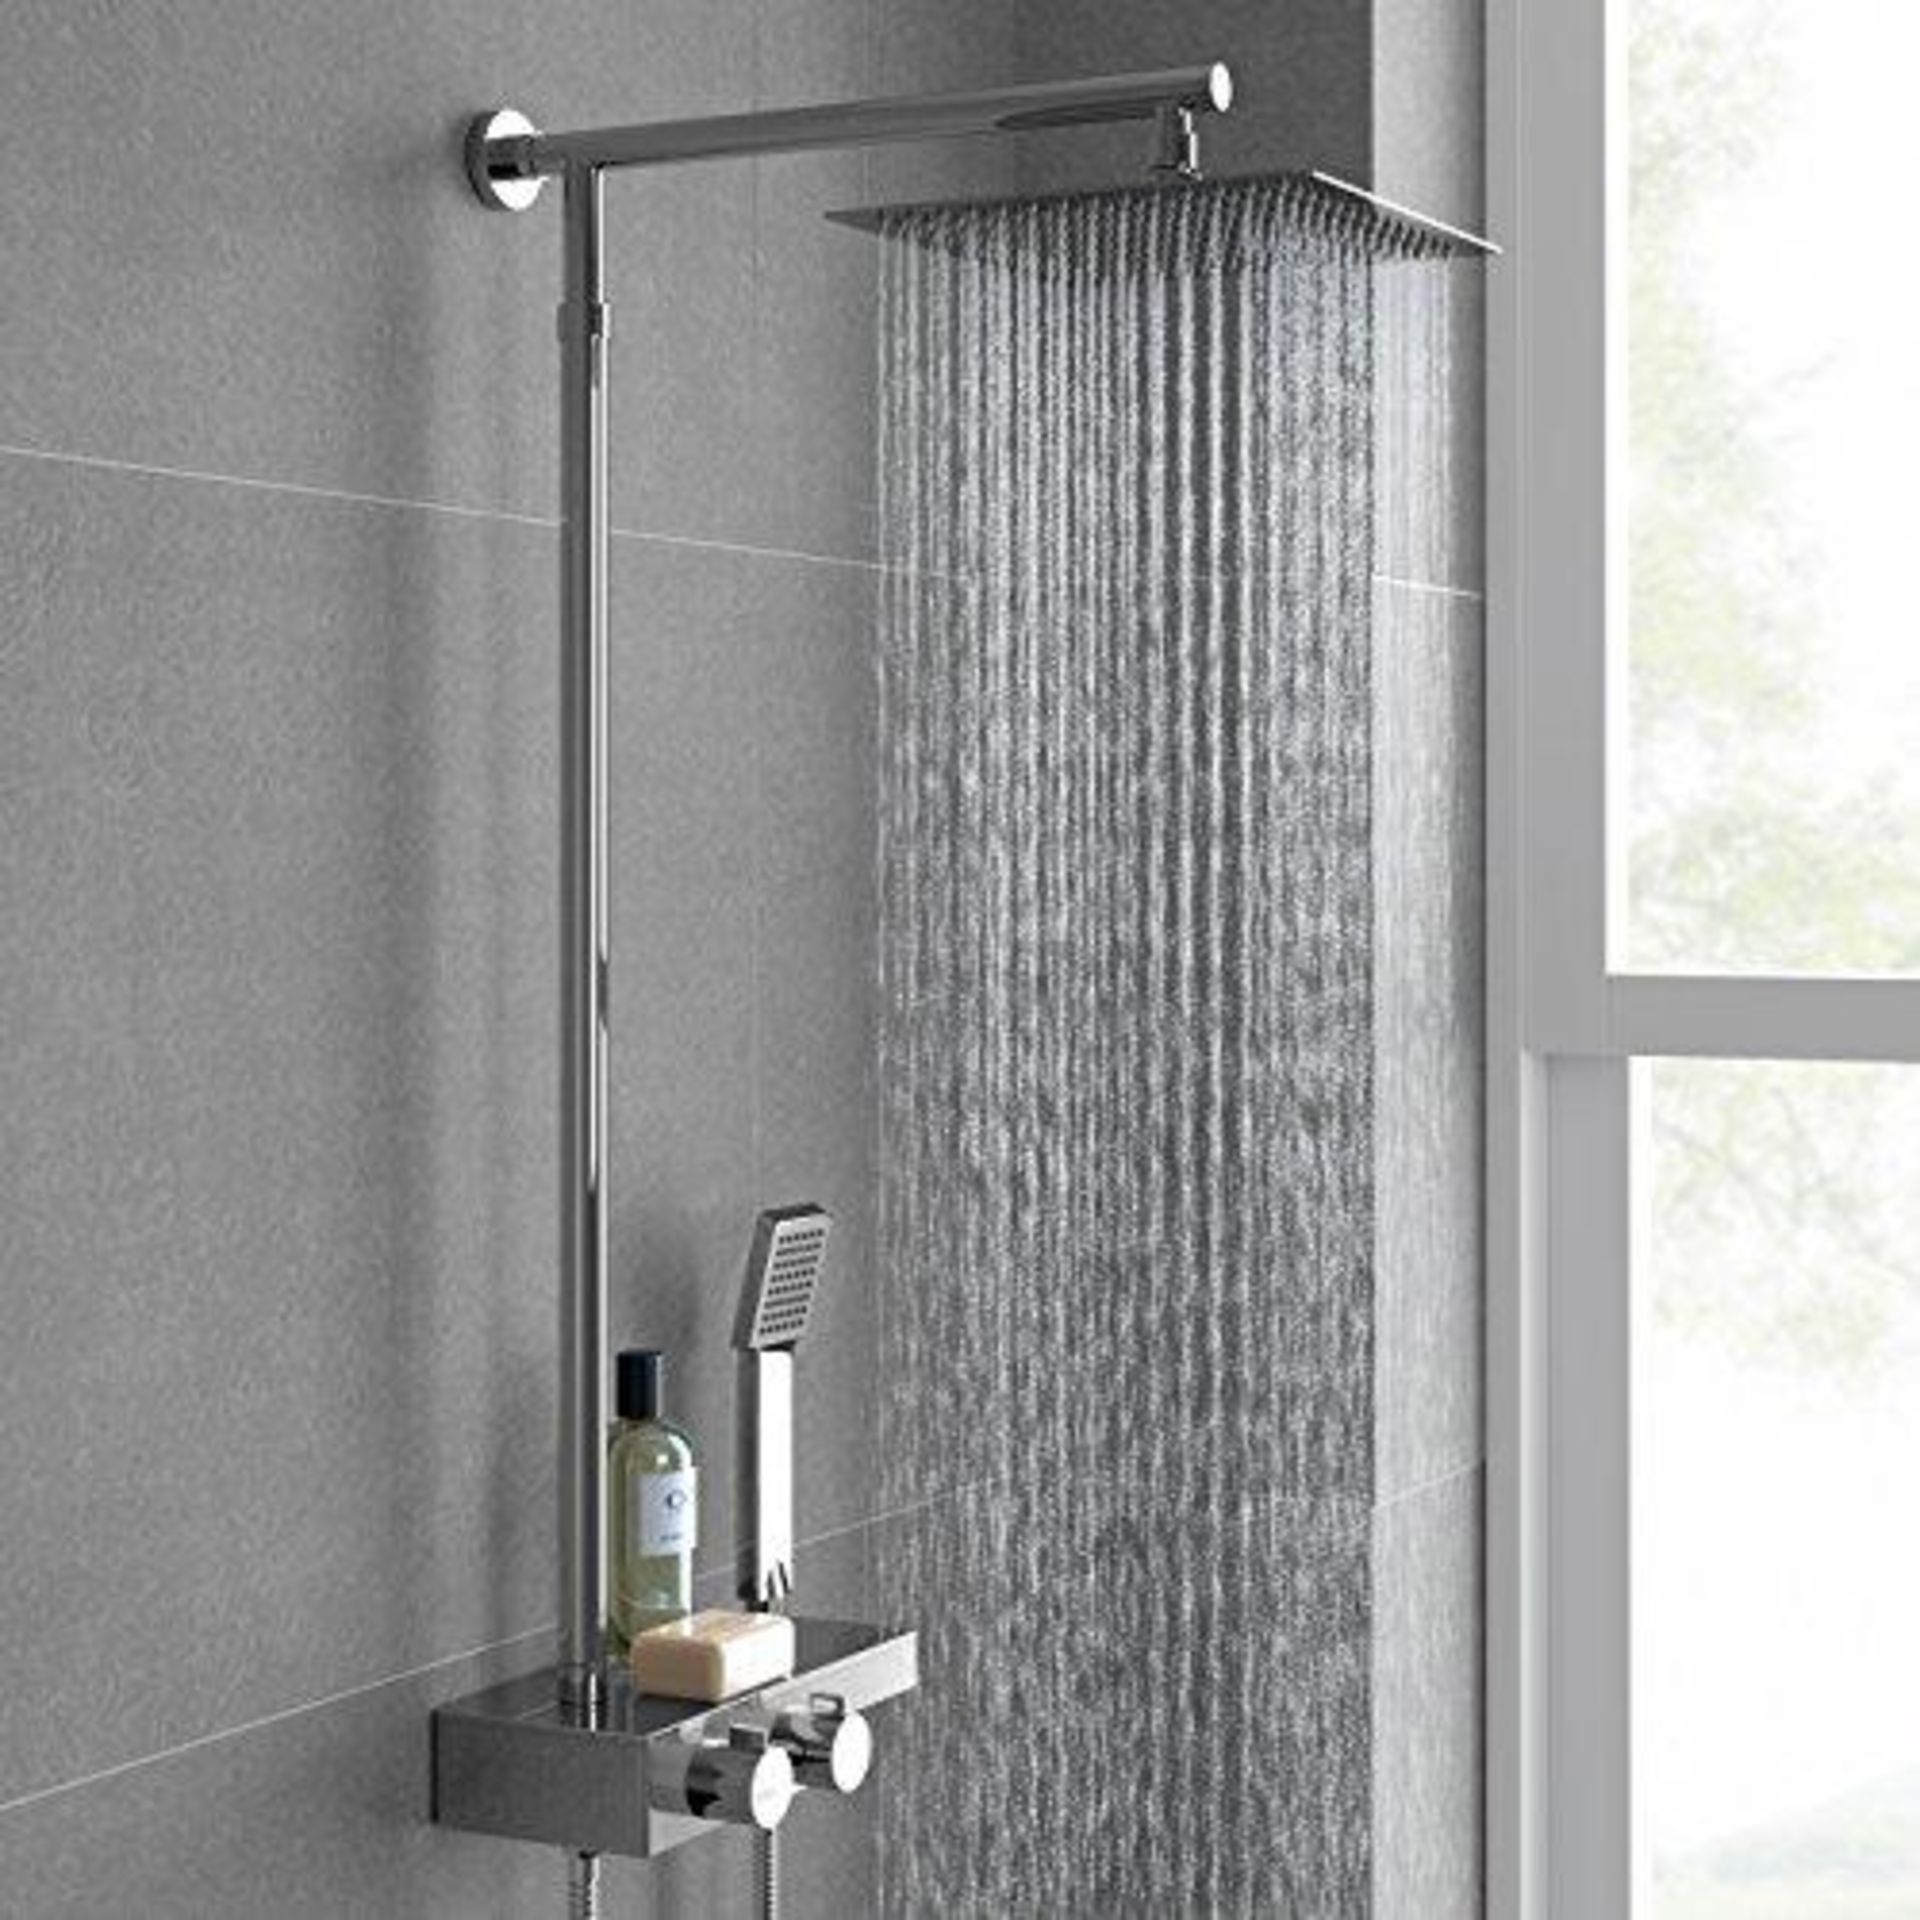 NEW & BOXED Square Thermostatic Bar Mixer Shower Set Valve with Shelf 10" Head + Handset. RRP ?... - Image 2 of 2